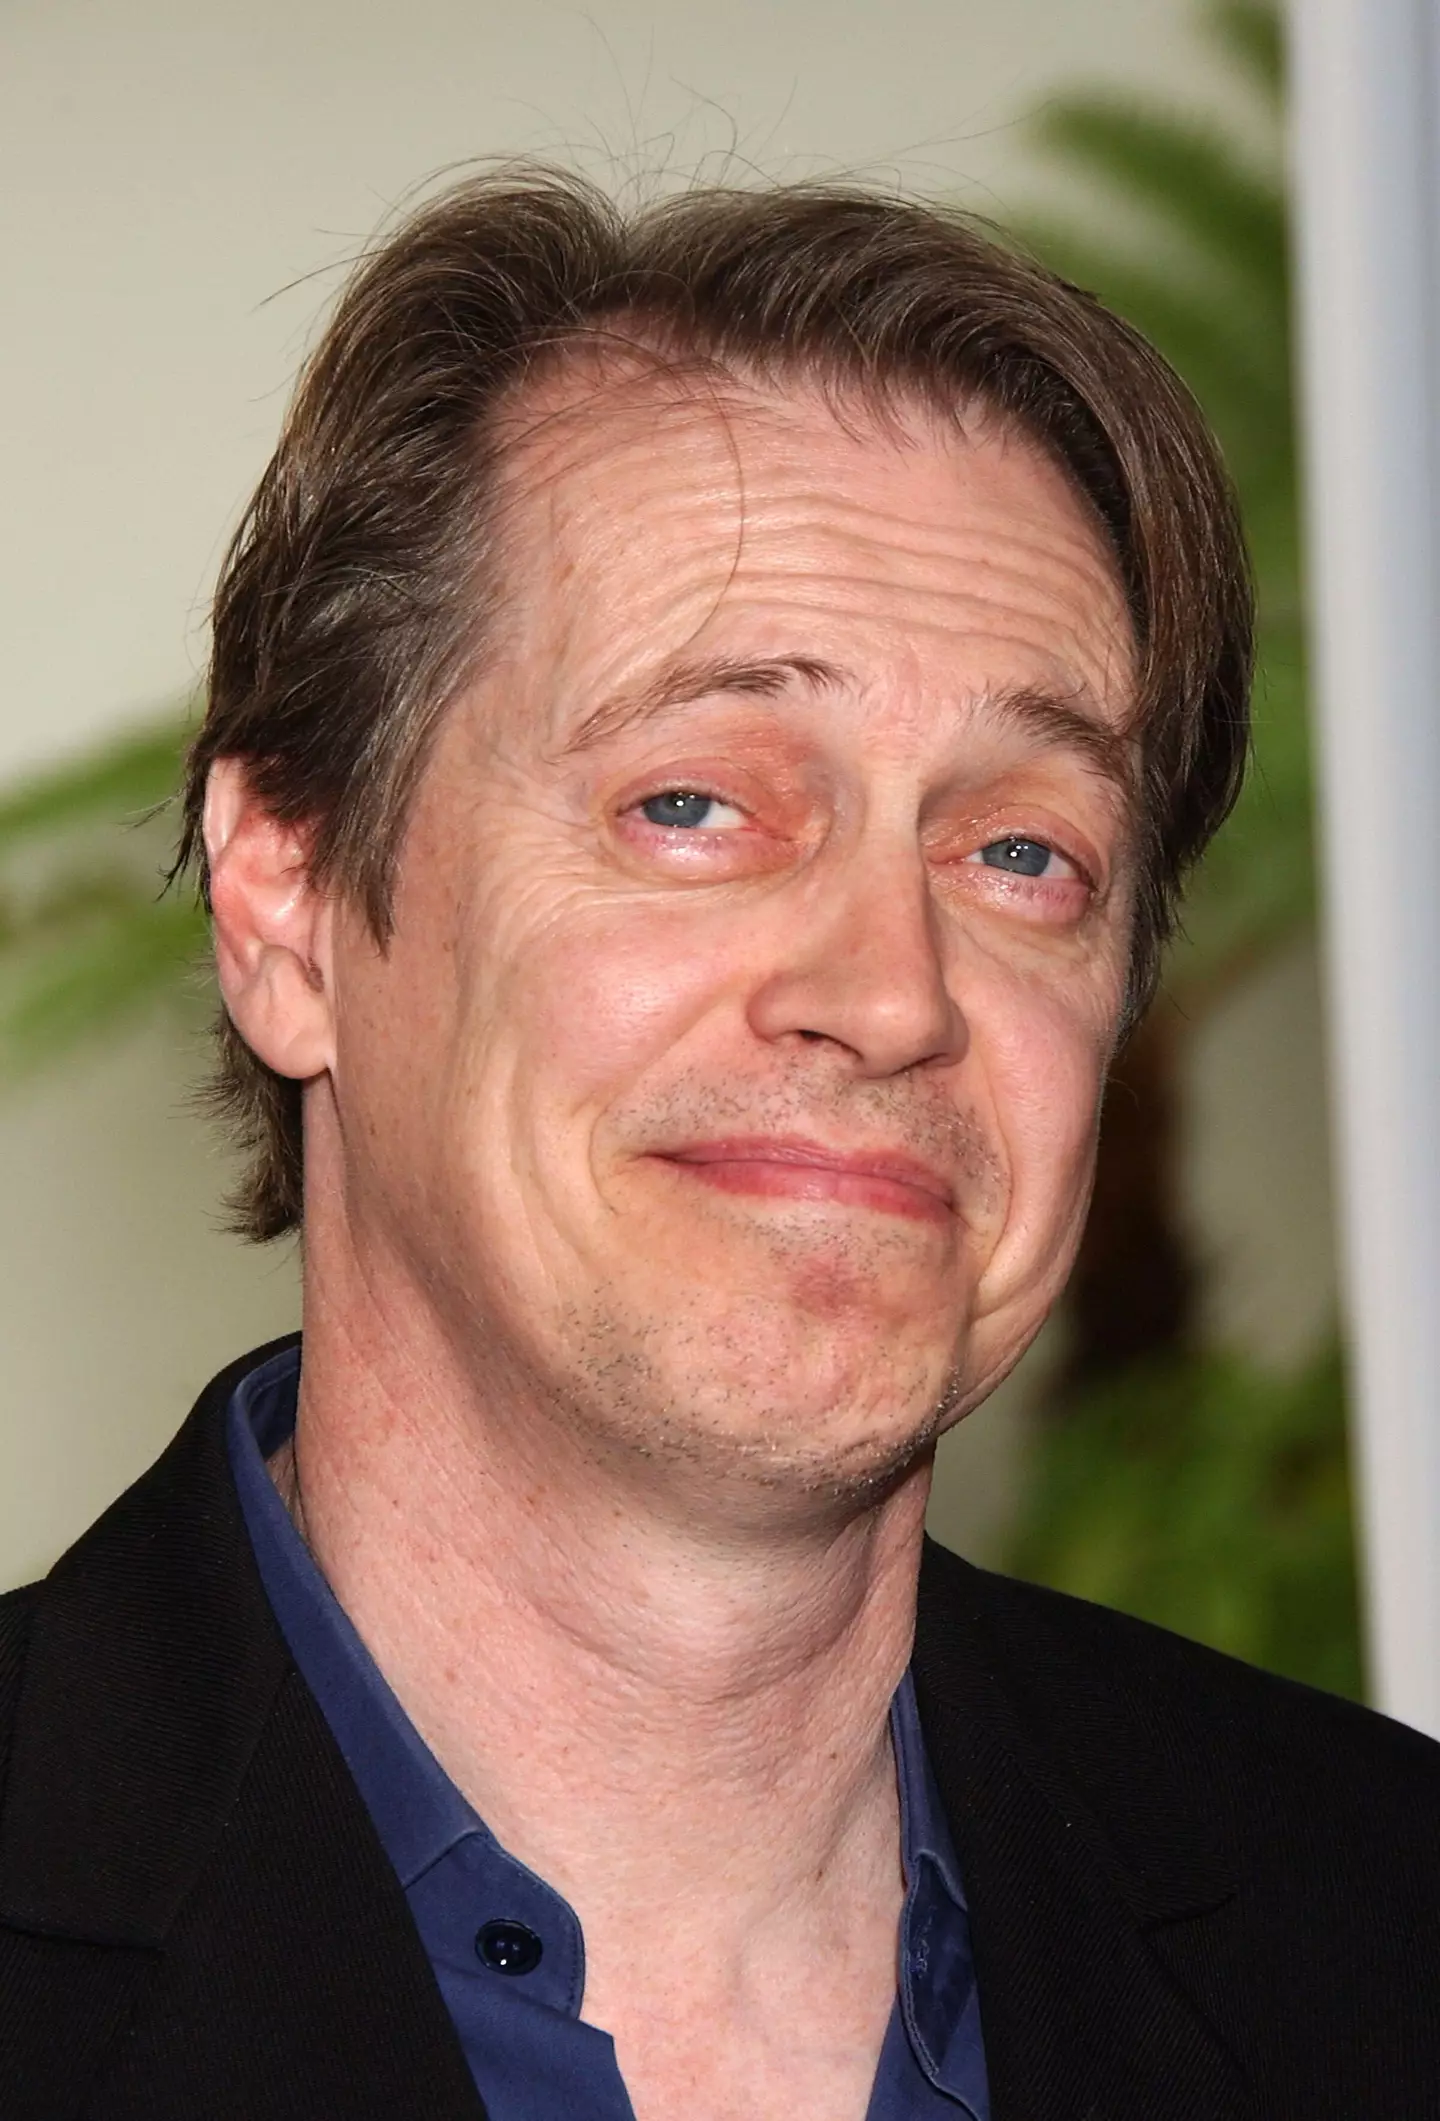 Steve Buscemi volunteered as a firefighter during 9/11.